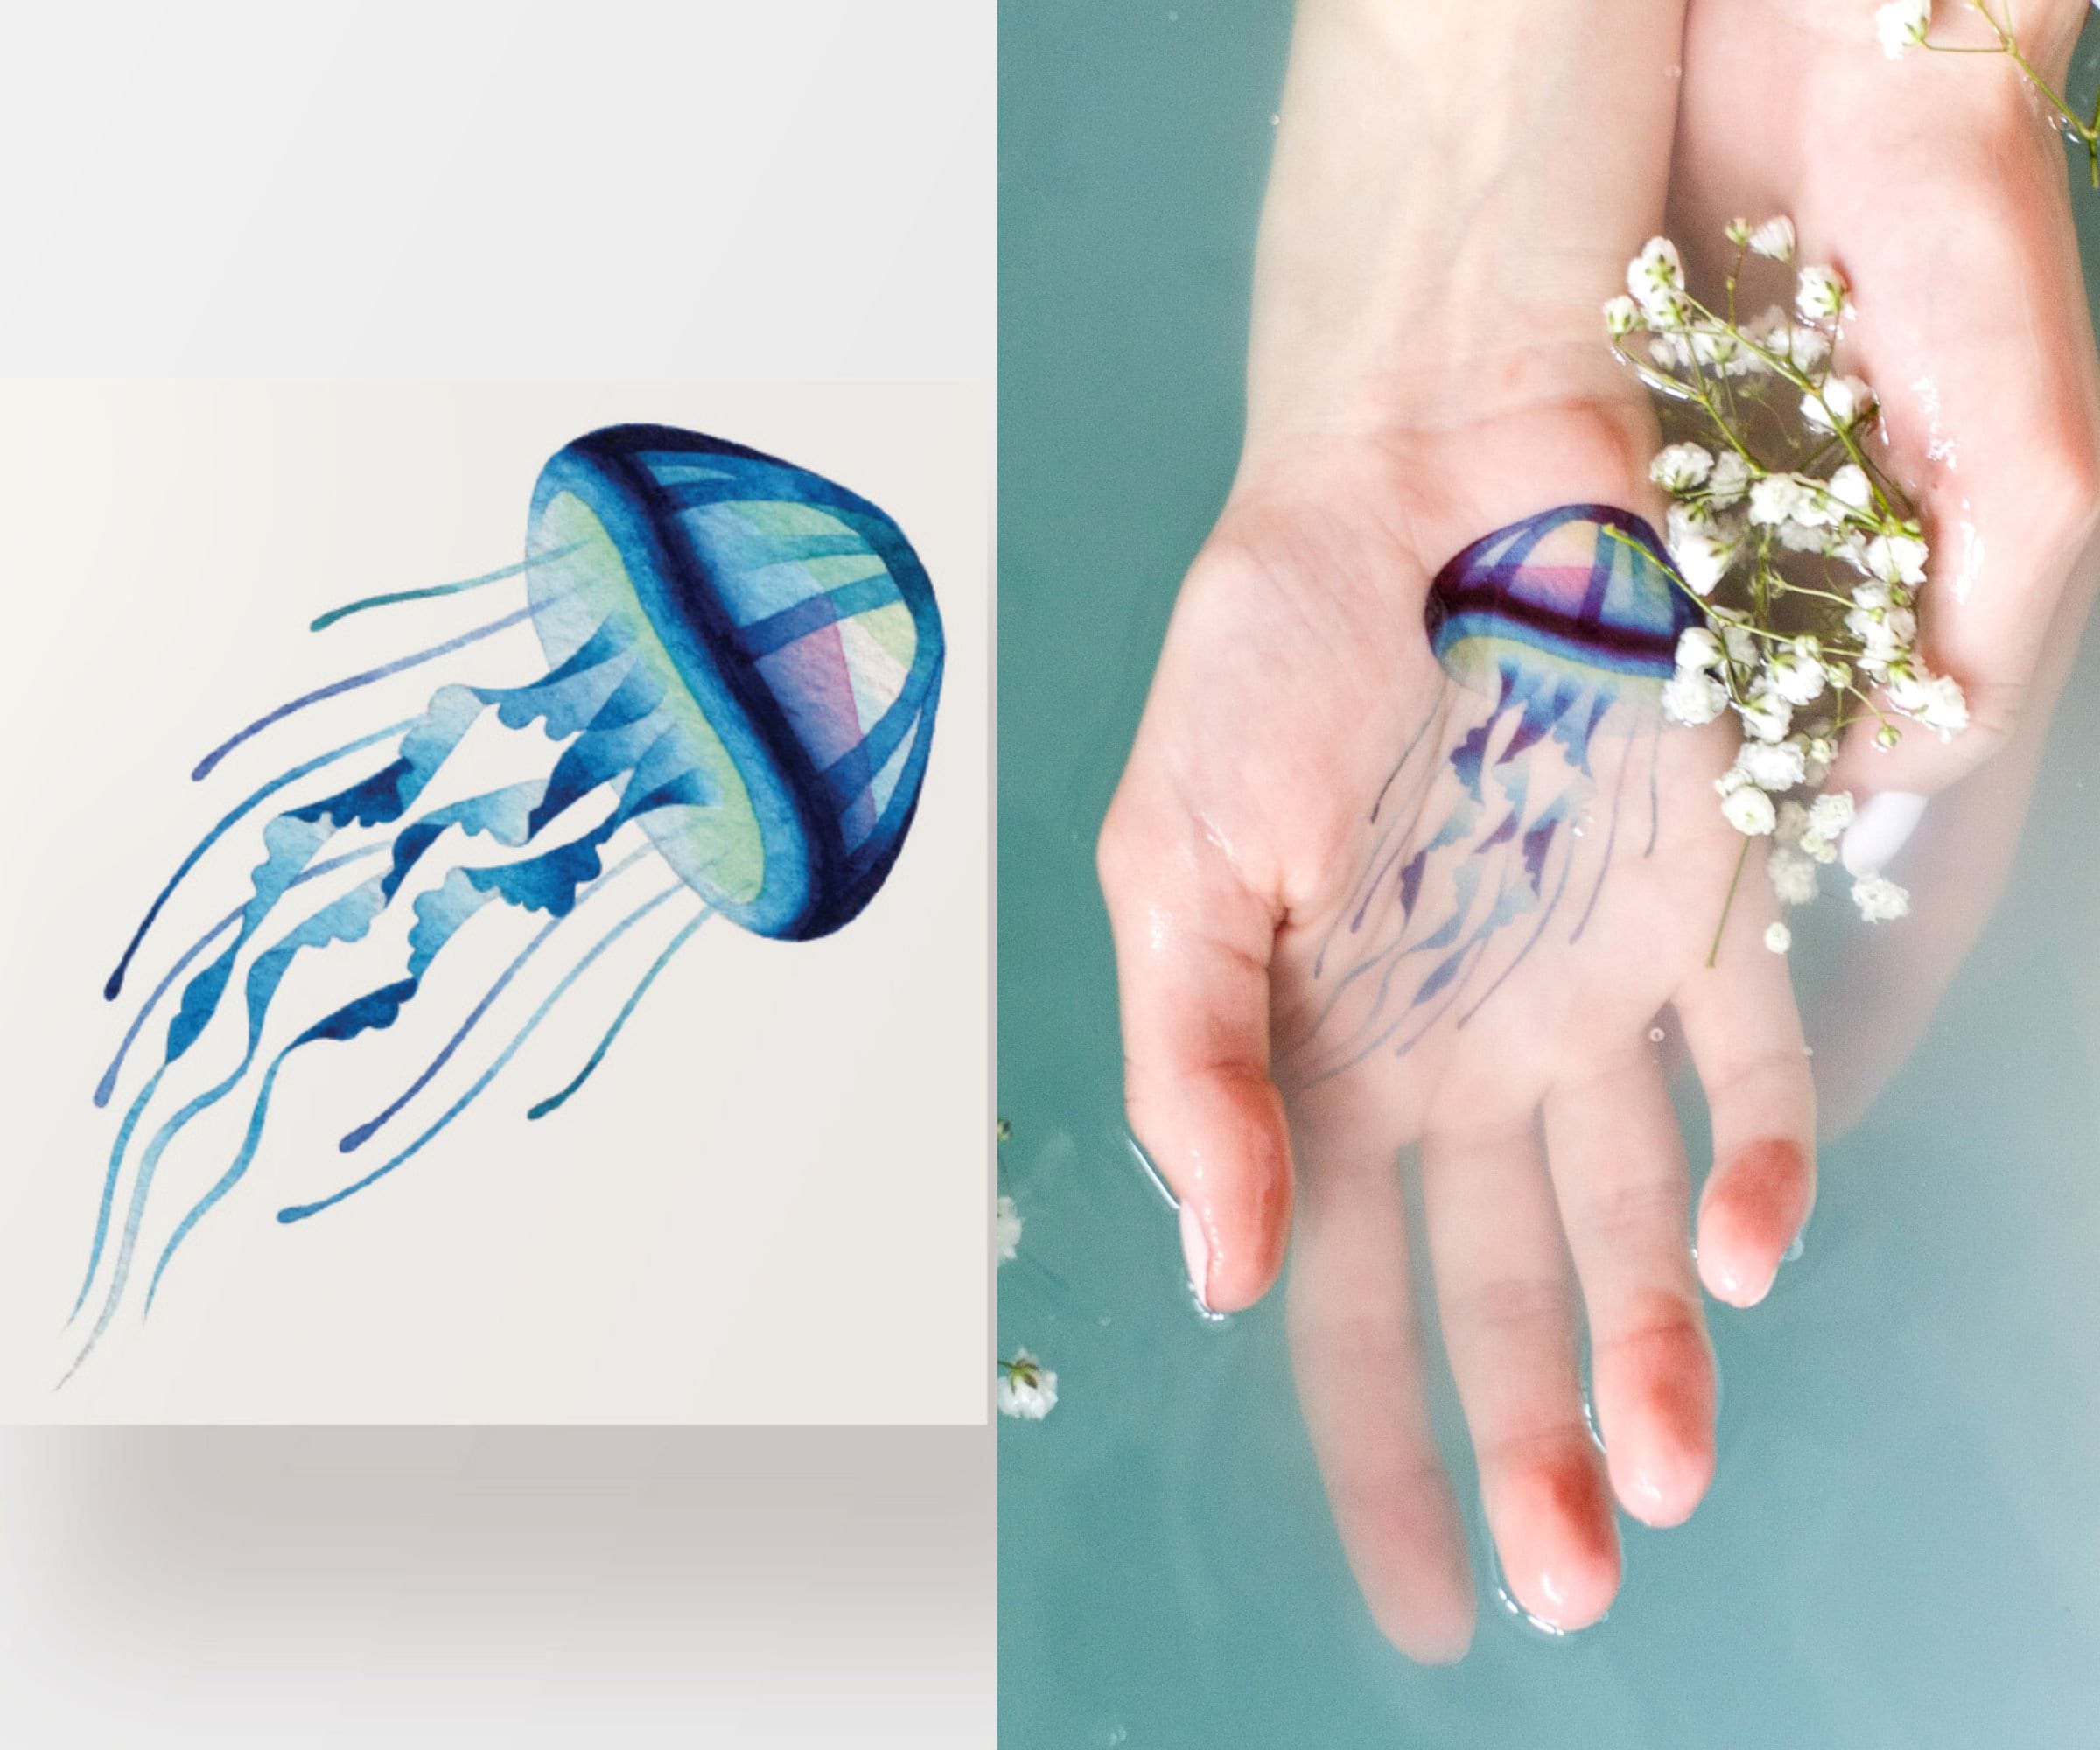 Jellyfish Tattoo Options | Celebrate Your Personality With Endless